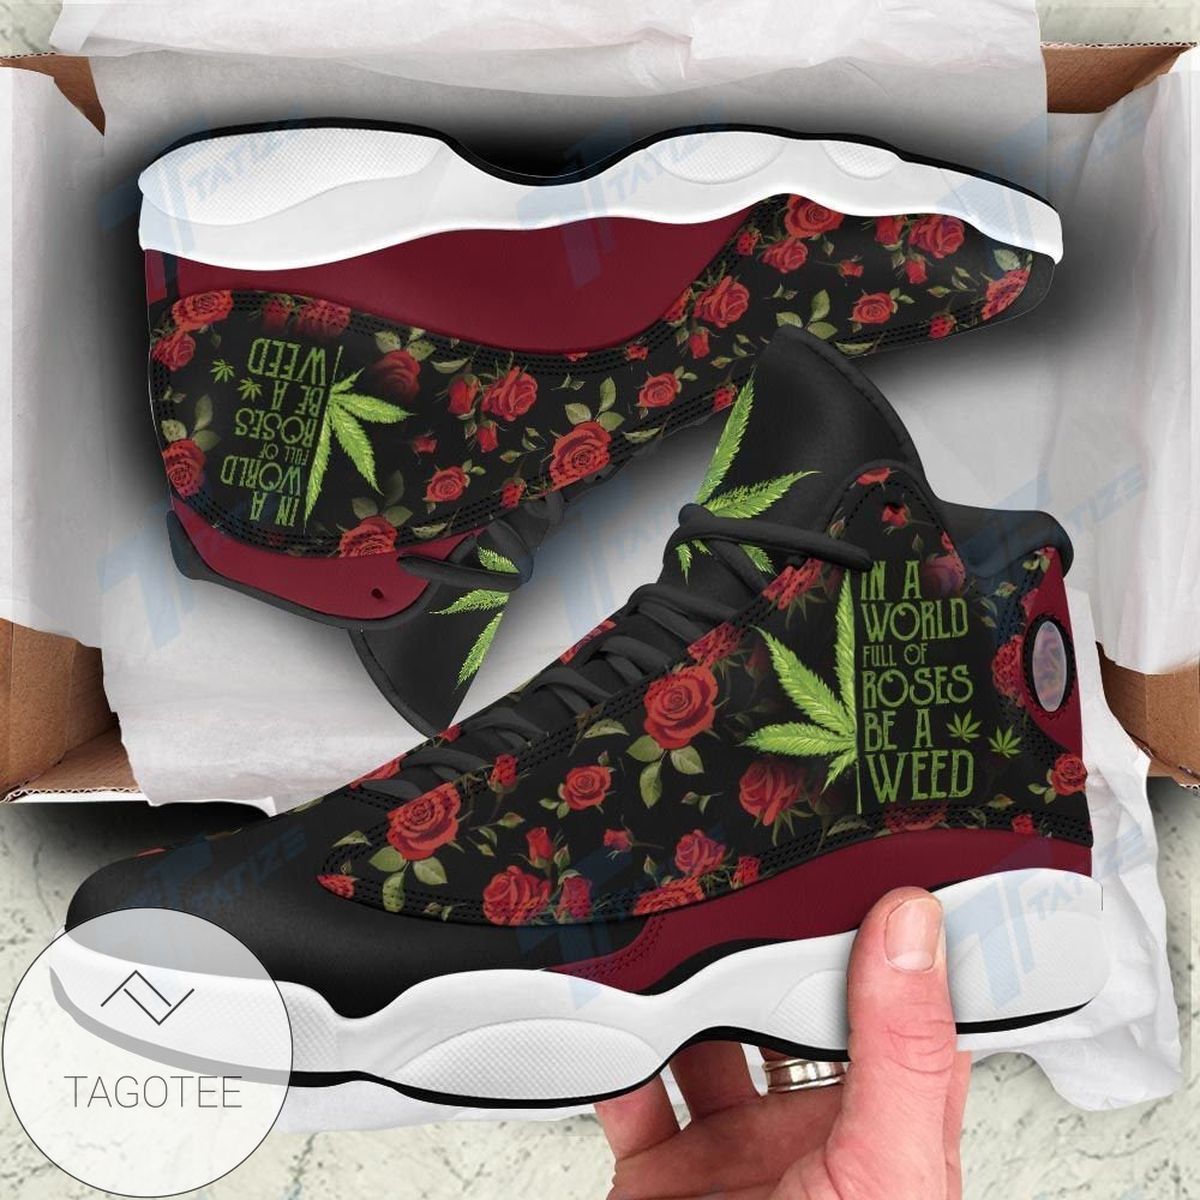 In A World Full Of Rose Be A Weed Air Jordan 13 Shoes Sneakers